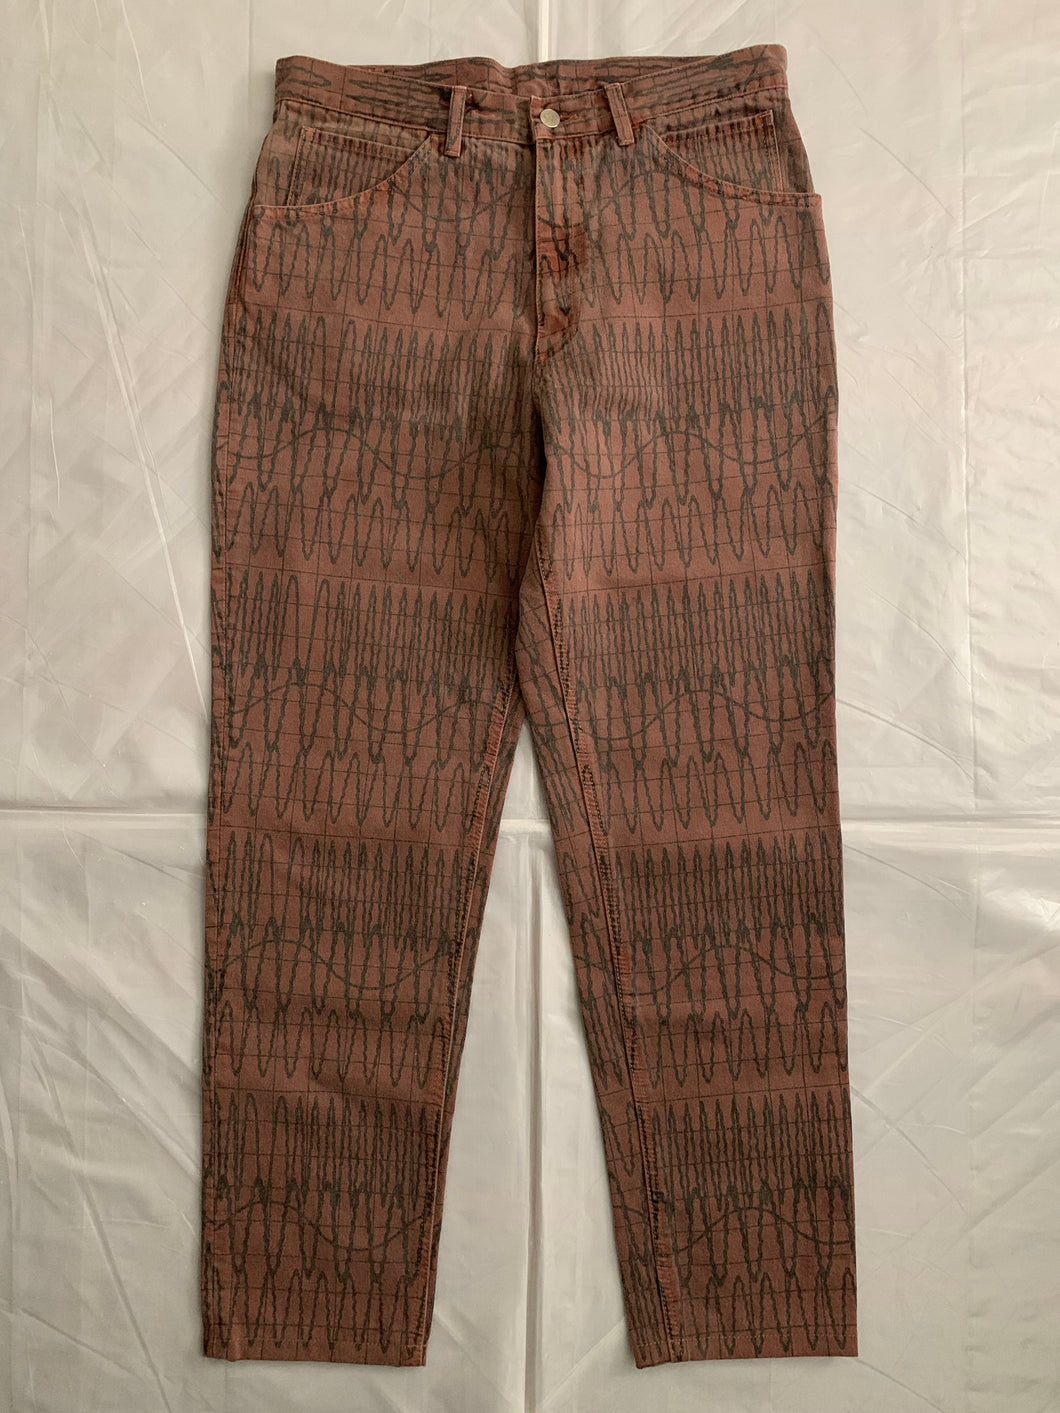 2010s Cav Empt Faded Burnt Orange Overdyed Pants with Soundwave Graphic - Size M